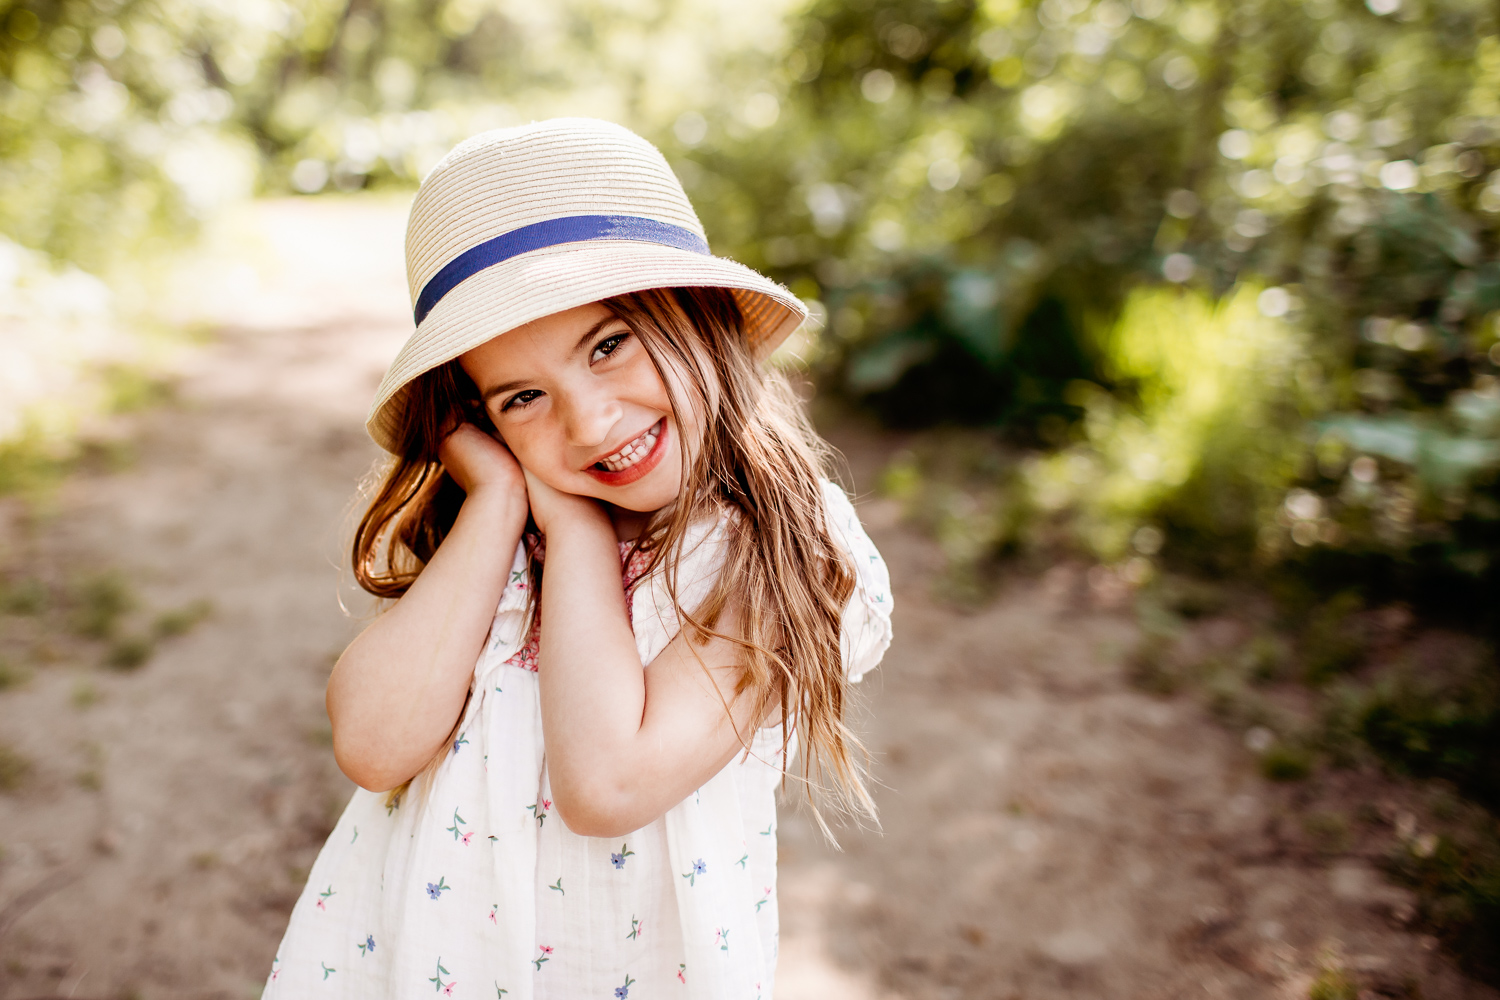 4 year old girl smiling at camera - Toronto Family Photographer